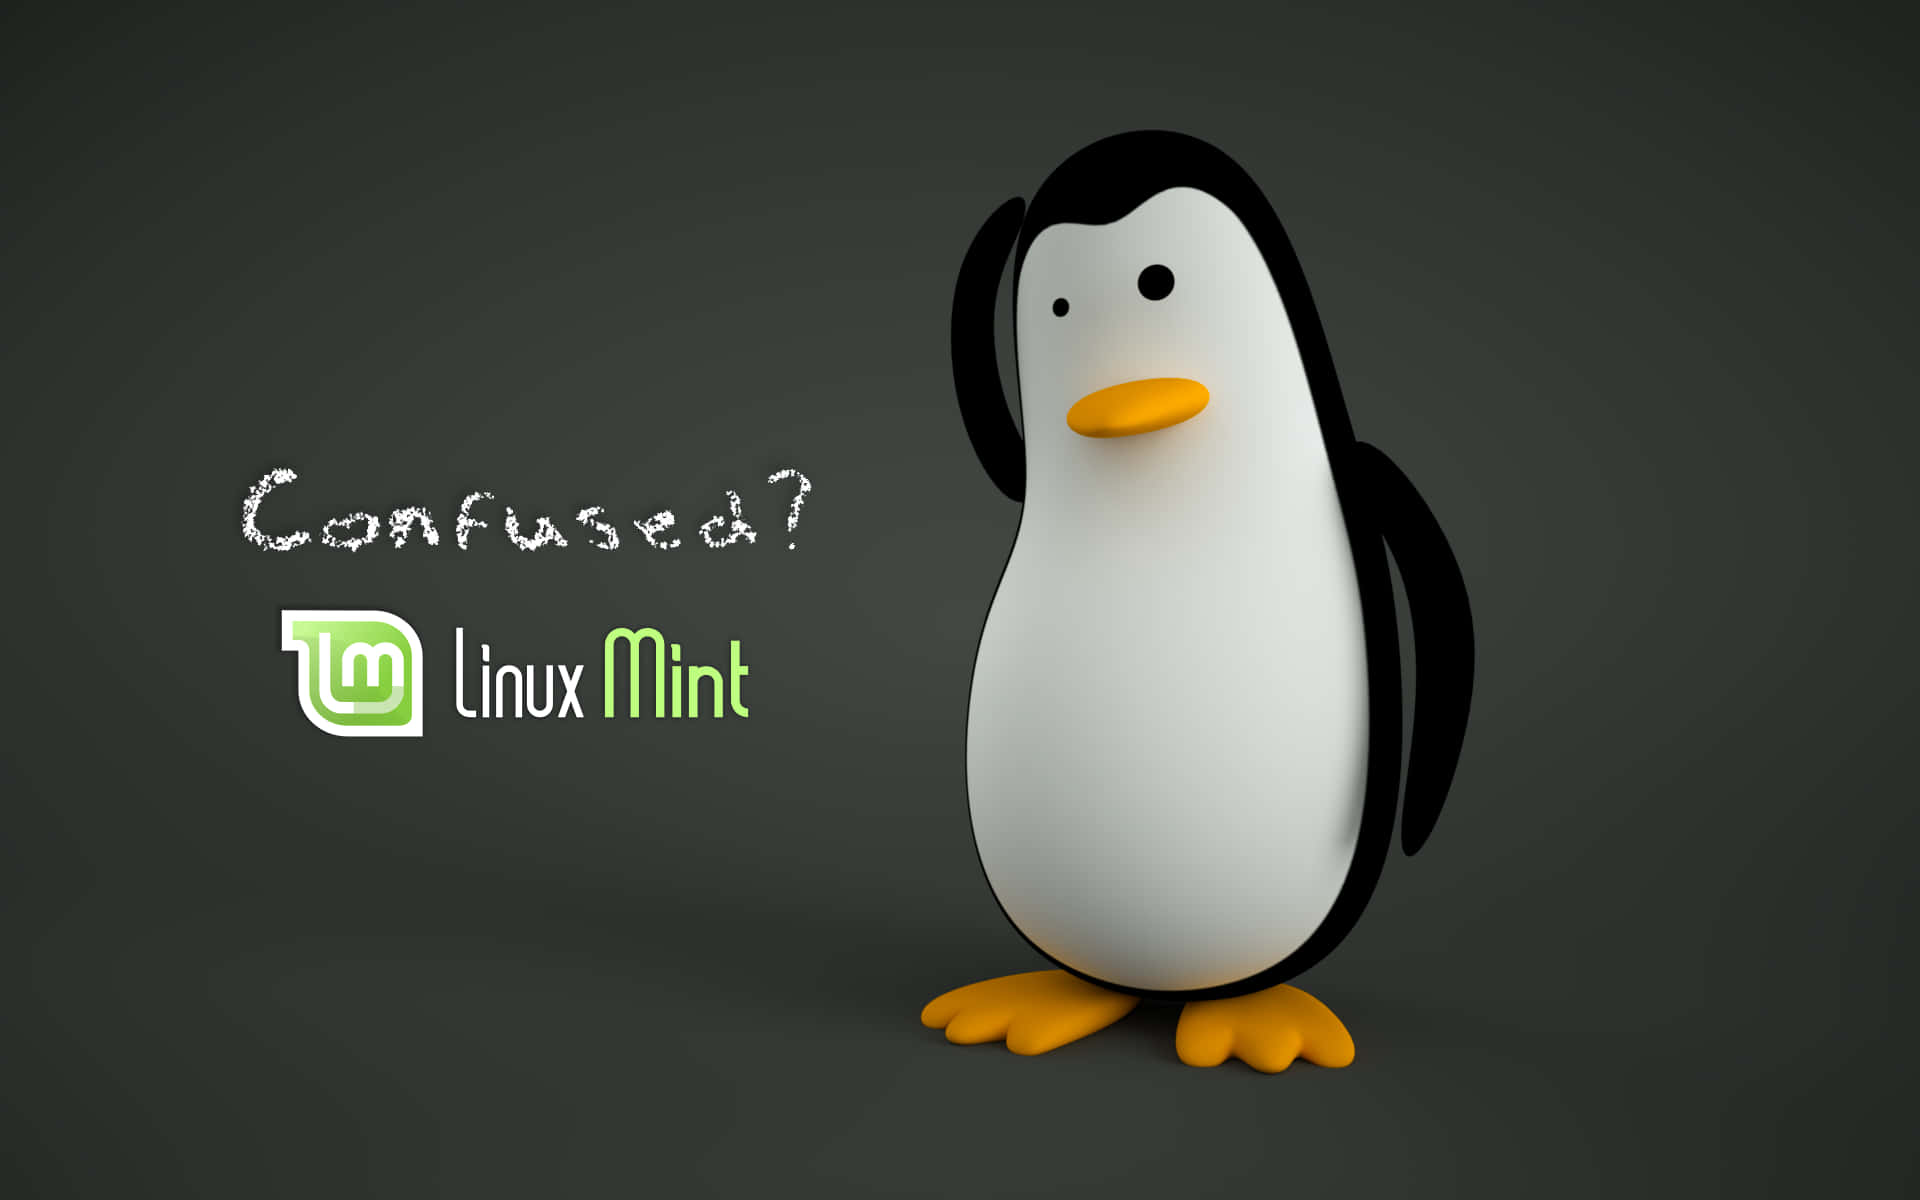 An abstract design of the Linux logo on a black background